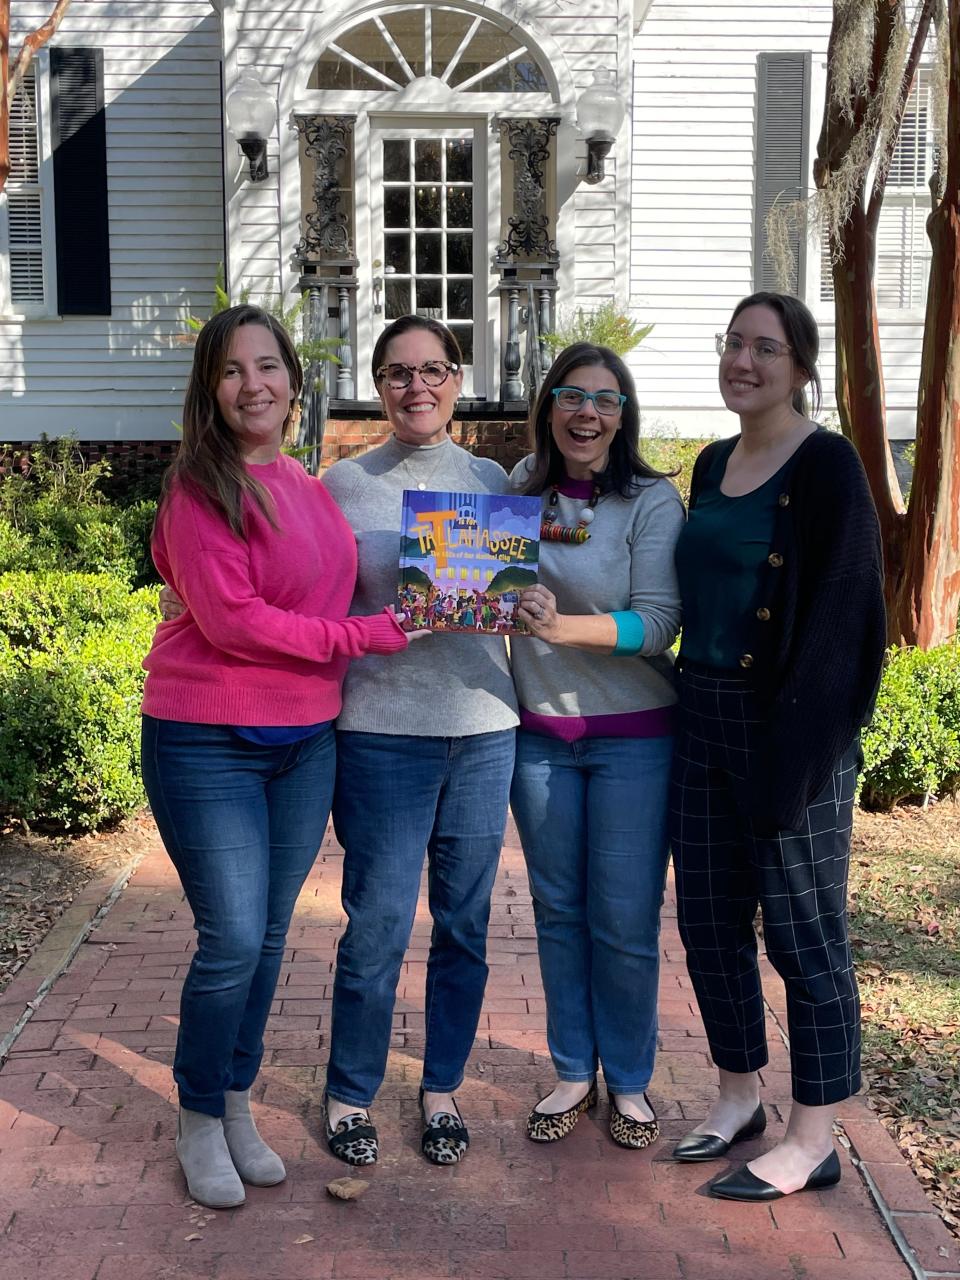 From left to right, Mary Kelsay, Director of Marketing for TSO; Mandy Stringer, CEO for TSO; Amanda Thompson of AKT Artful; Katie Conway, Director of Patron Services, TSO after unpacking the "T is for Tallahassee" Nov. 2, 2023.